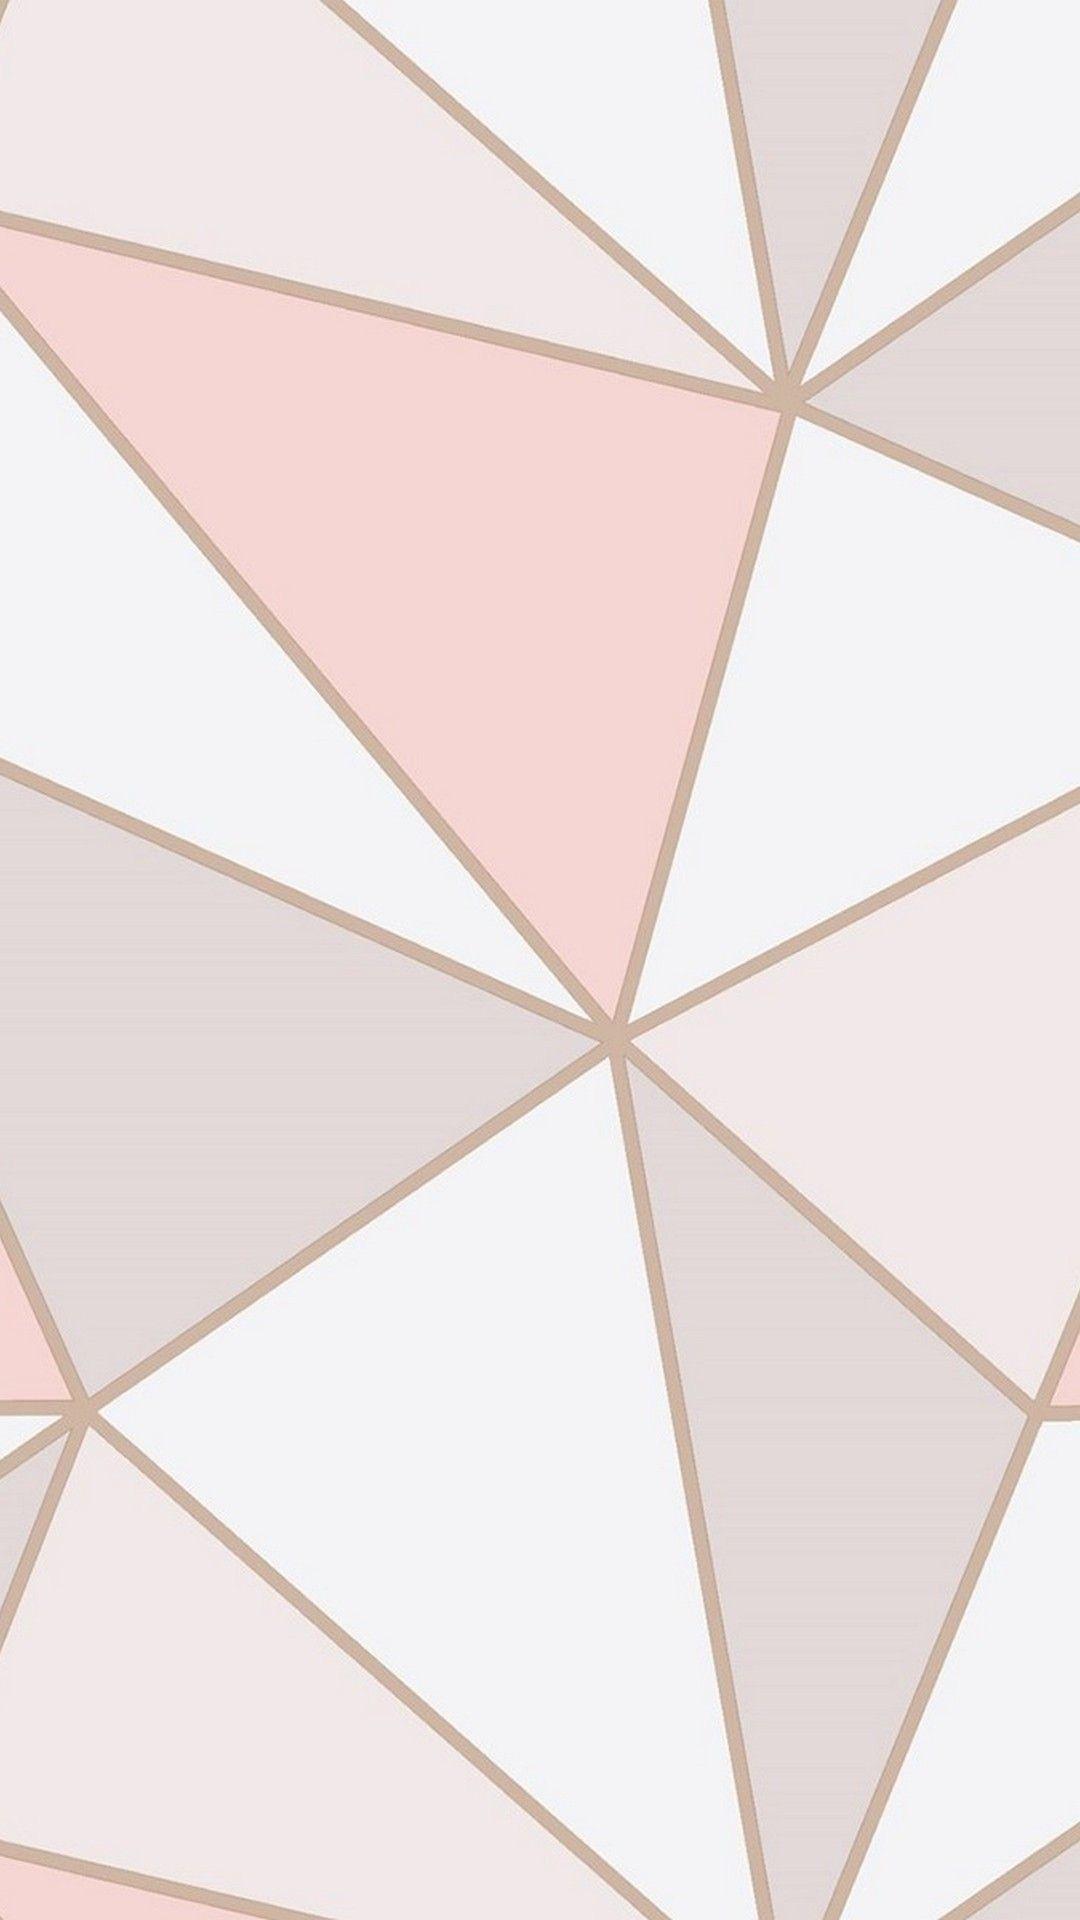 Rose Gold iPhone Wallpapers - Top Free